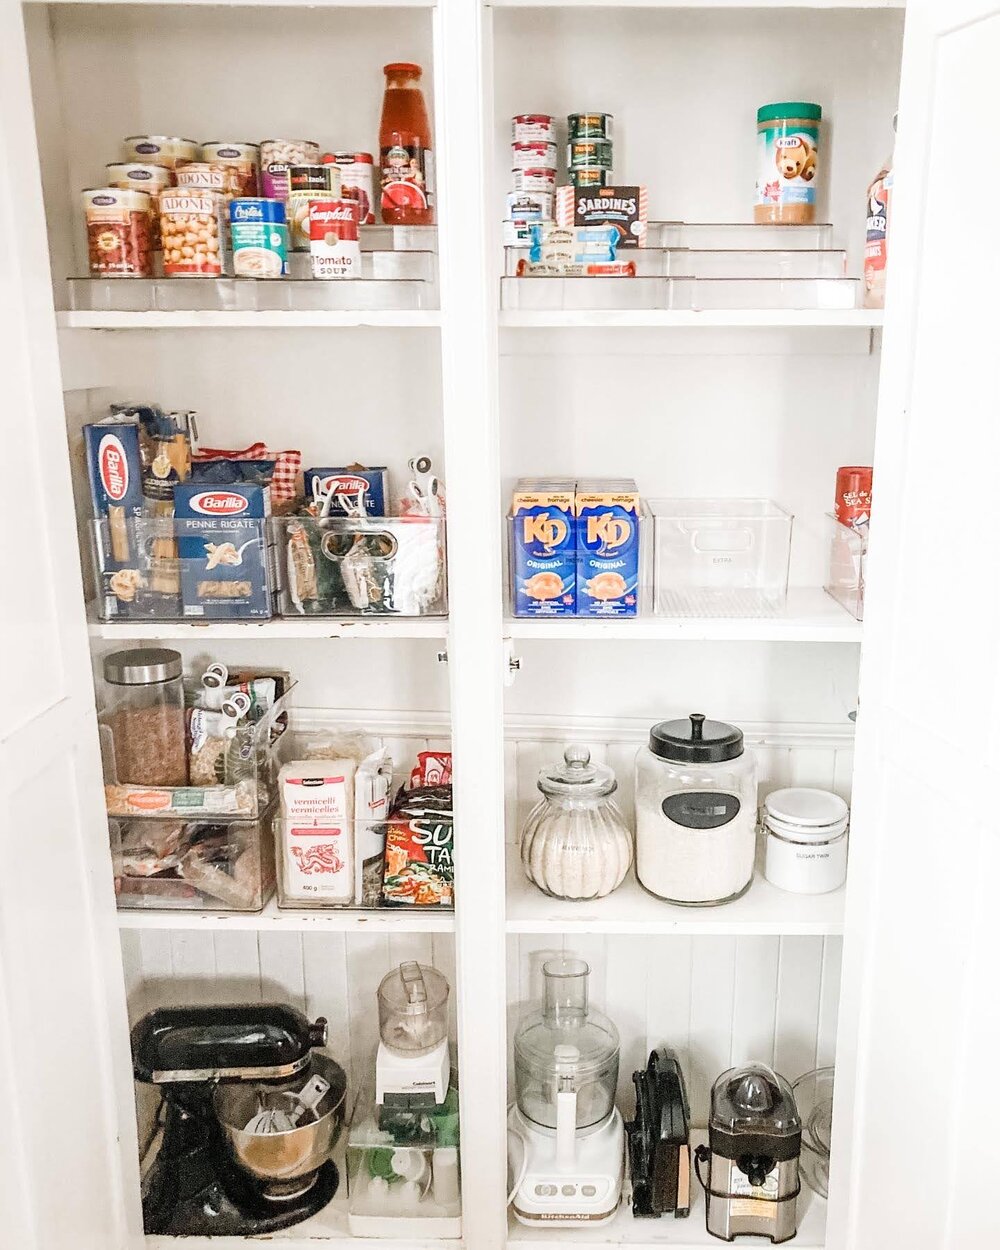 pantry-everything in place.jpg